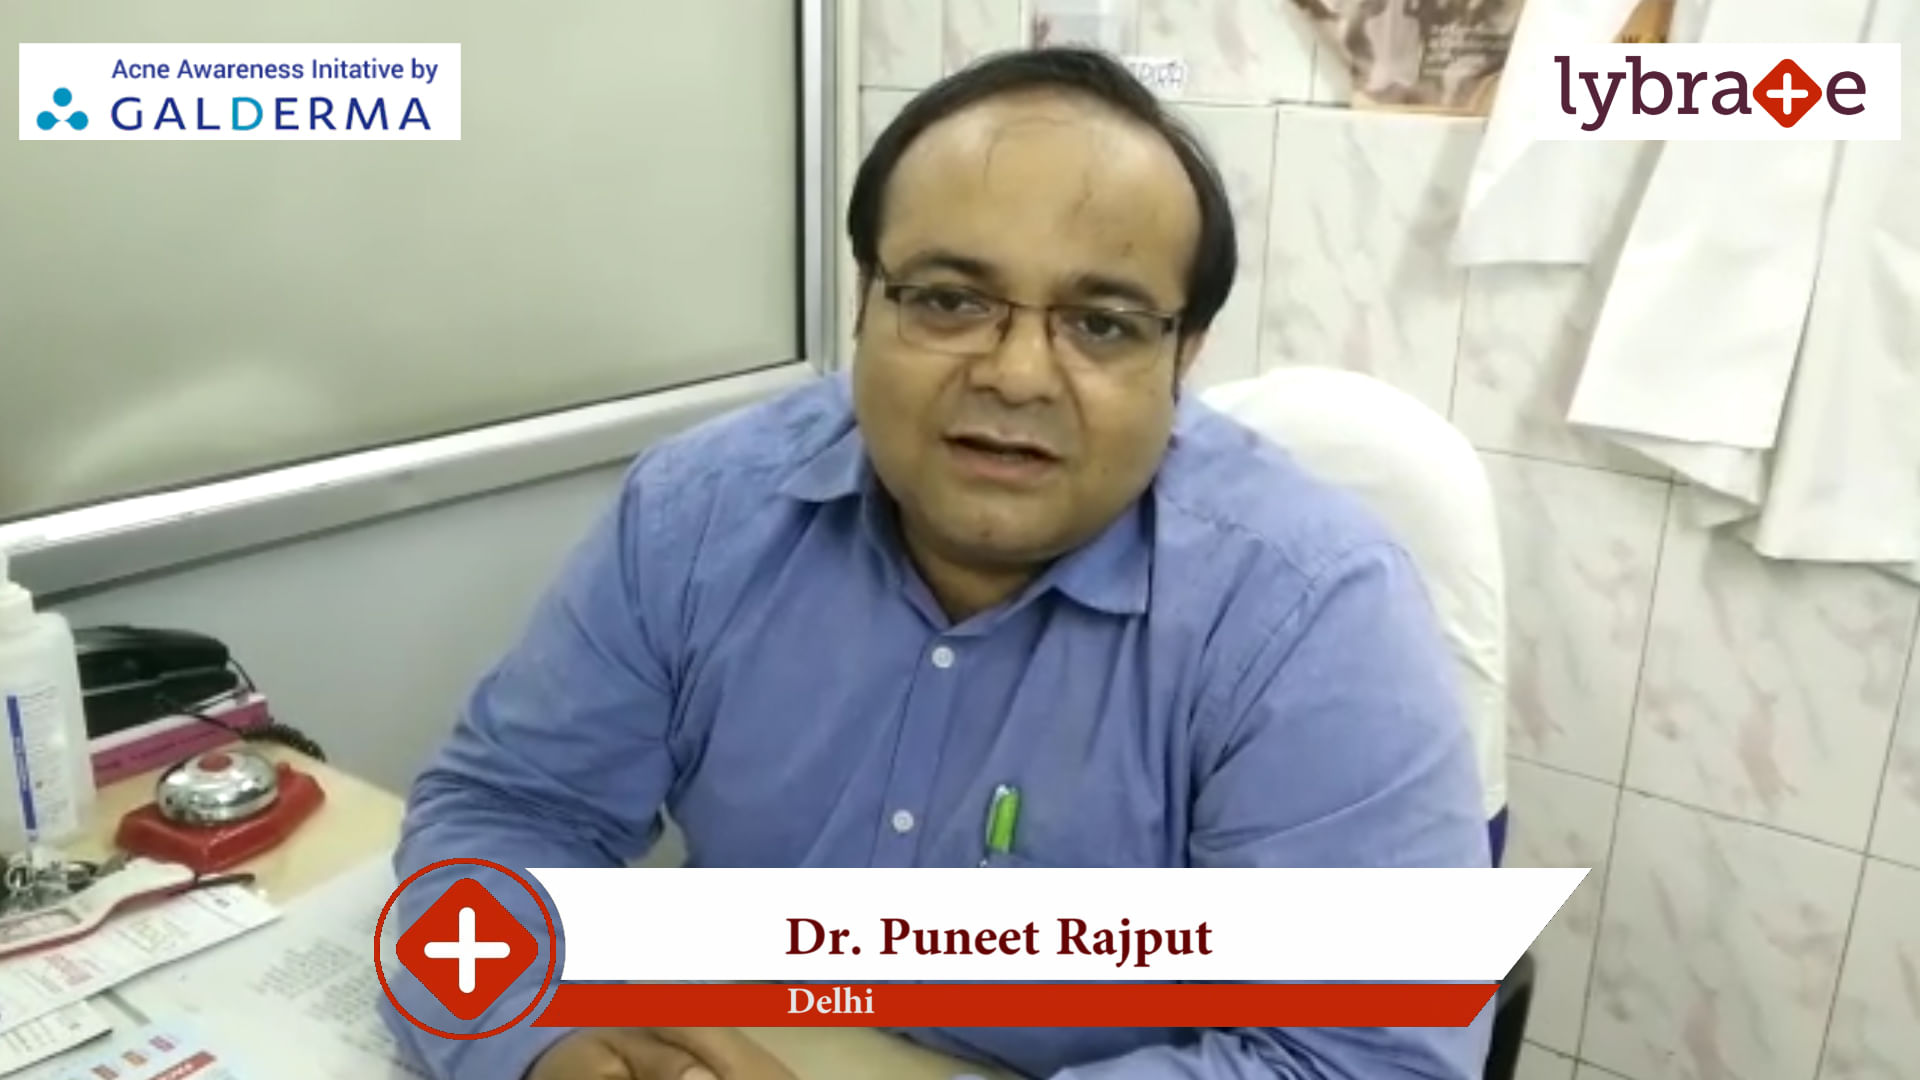 Lybrate | Dr. Puneet Rajput speaks on IMPORTANCE OF TREATING ACNE EARLY